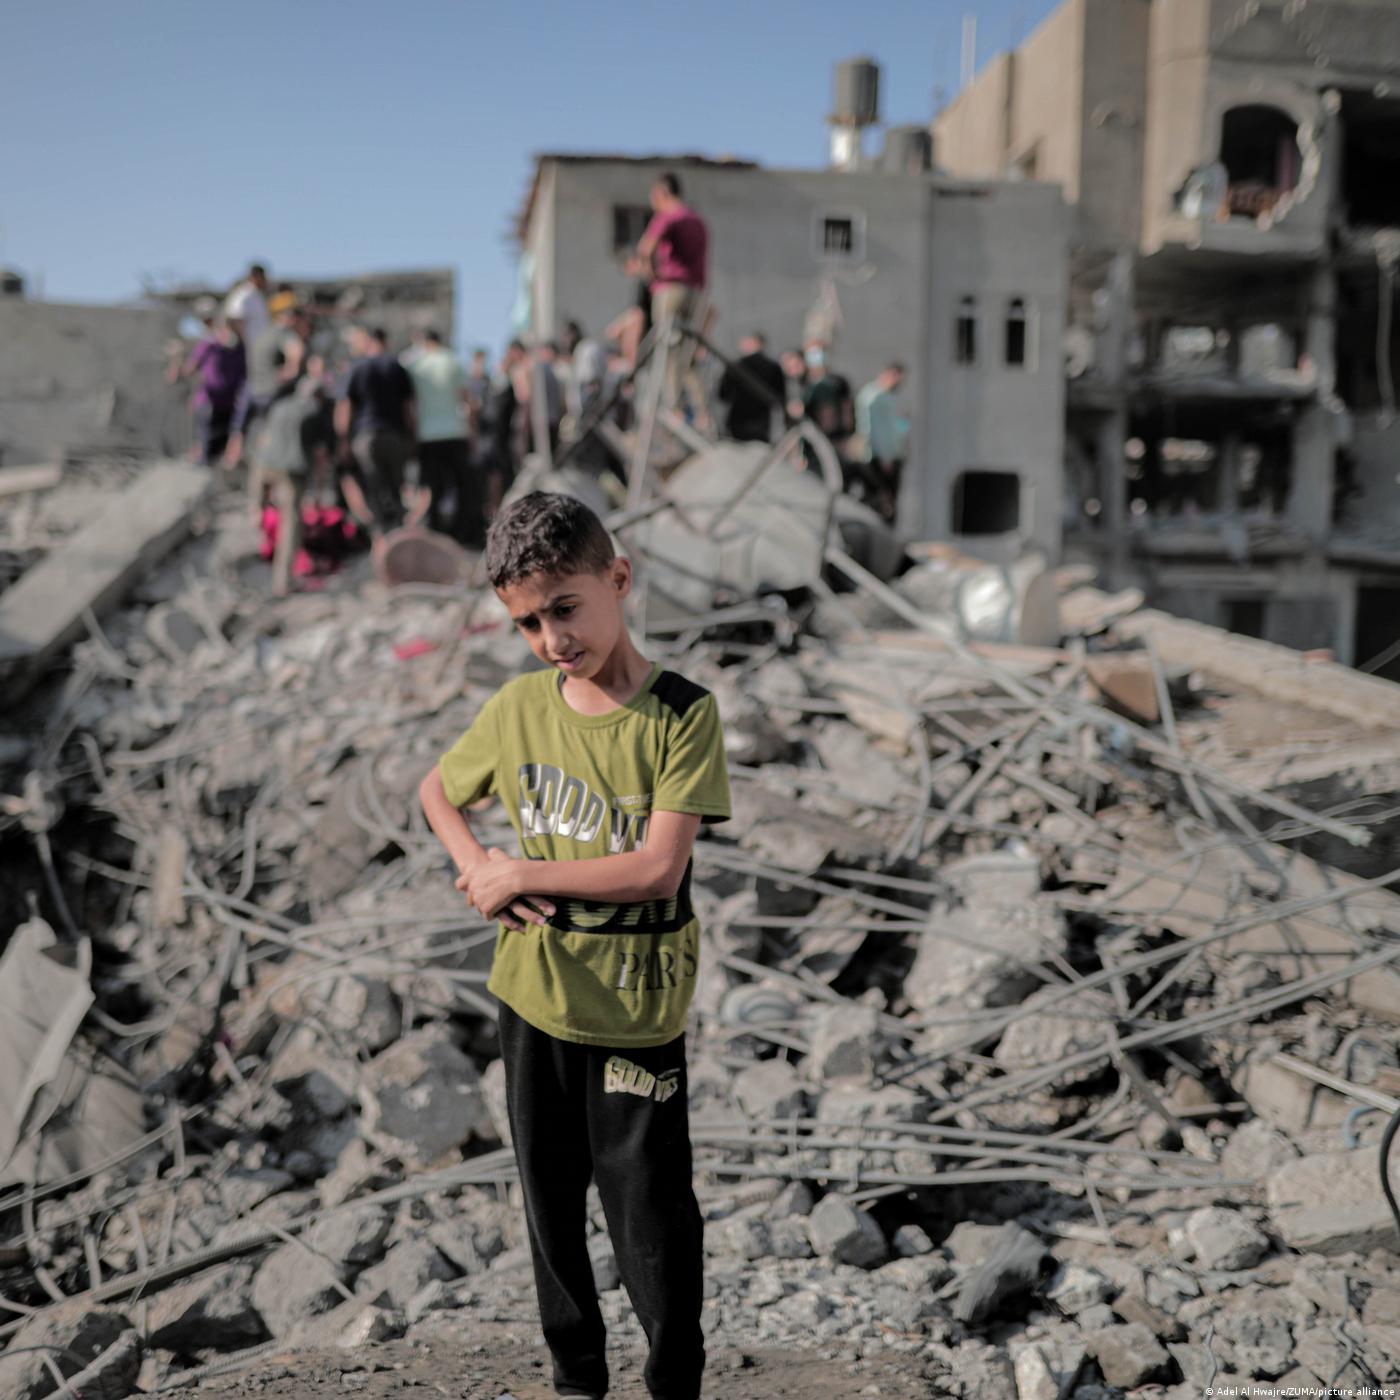 When is the cost in human suffering too high for Israel?